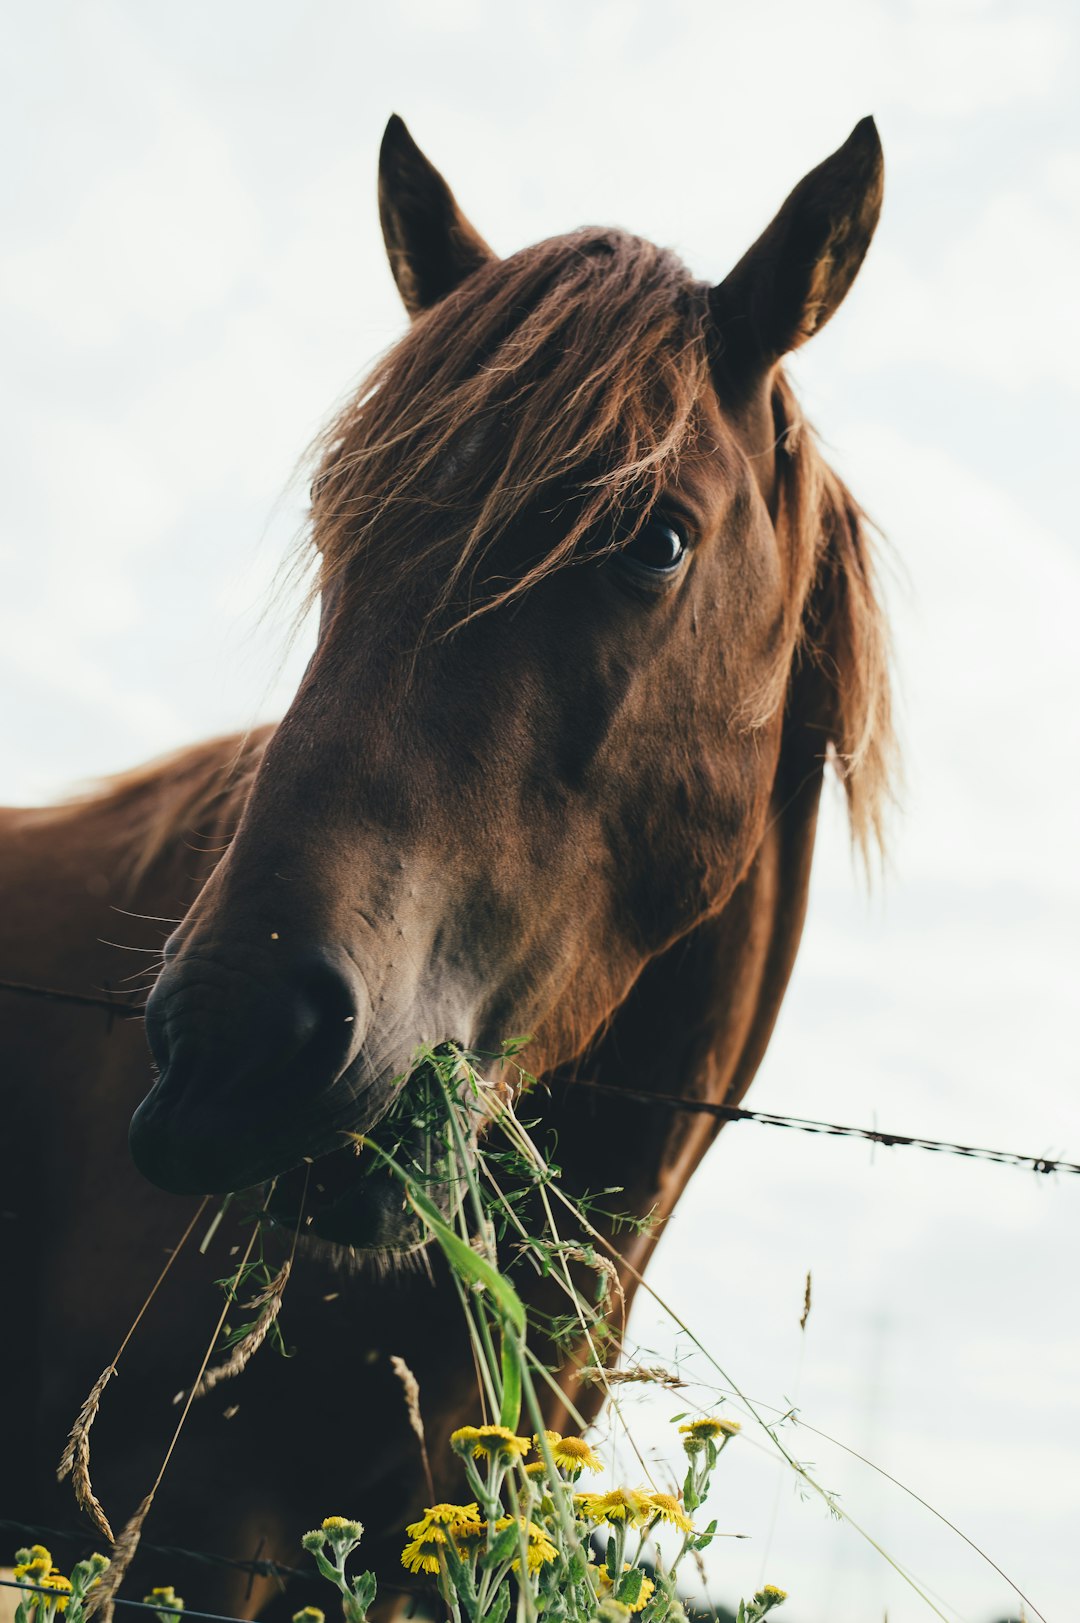 Horse chewing grass